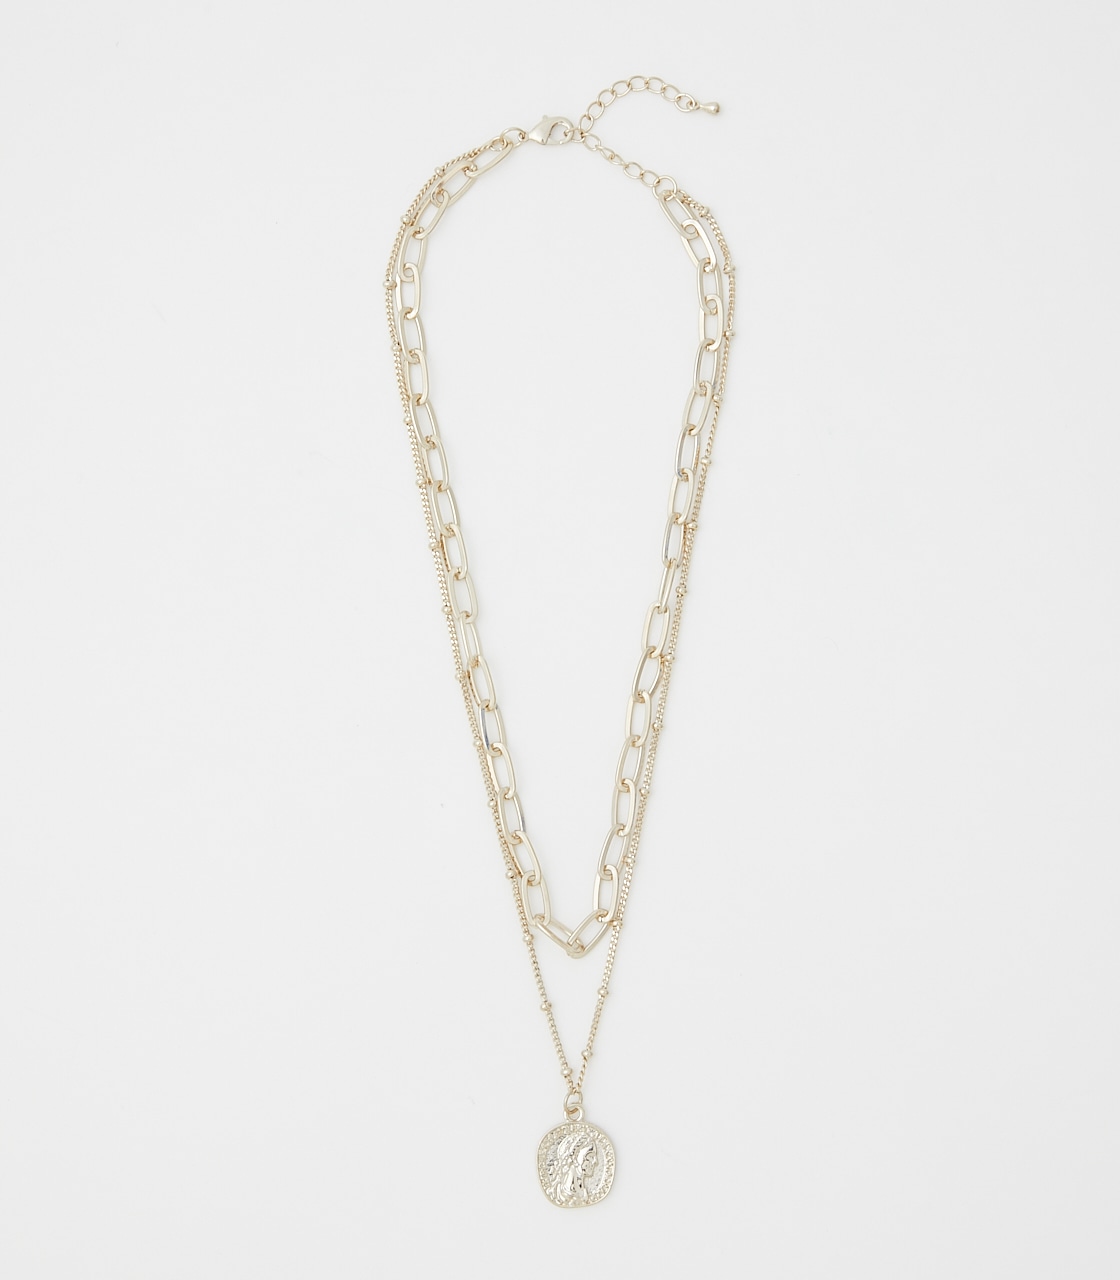 DOUBLE CHAIN COIN NECKLACE/ダブルチェーンコインネックレス 詳細画像 L/GLD 1